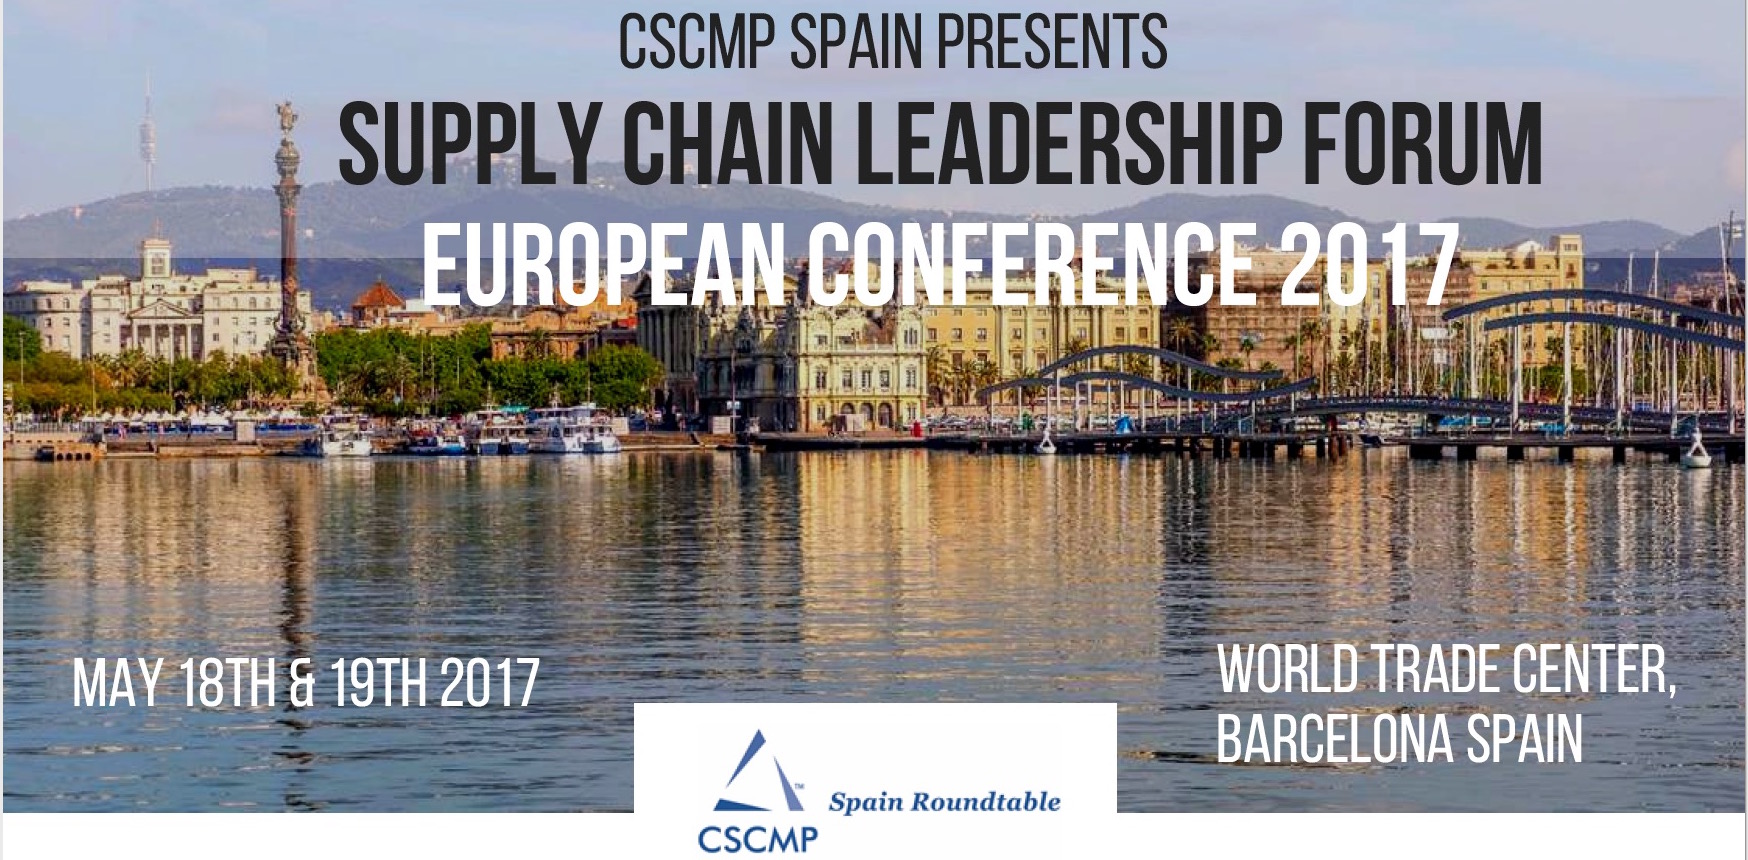 Supply Chain Leadership Forum European Conference 2017